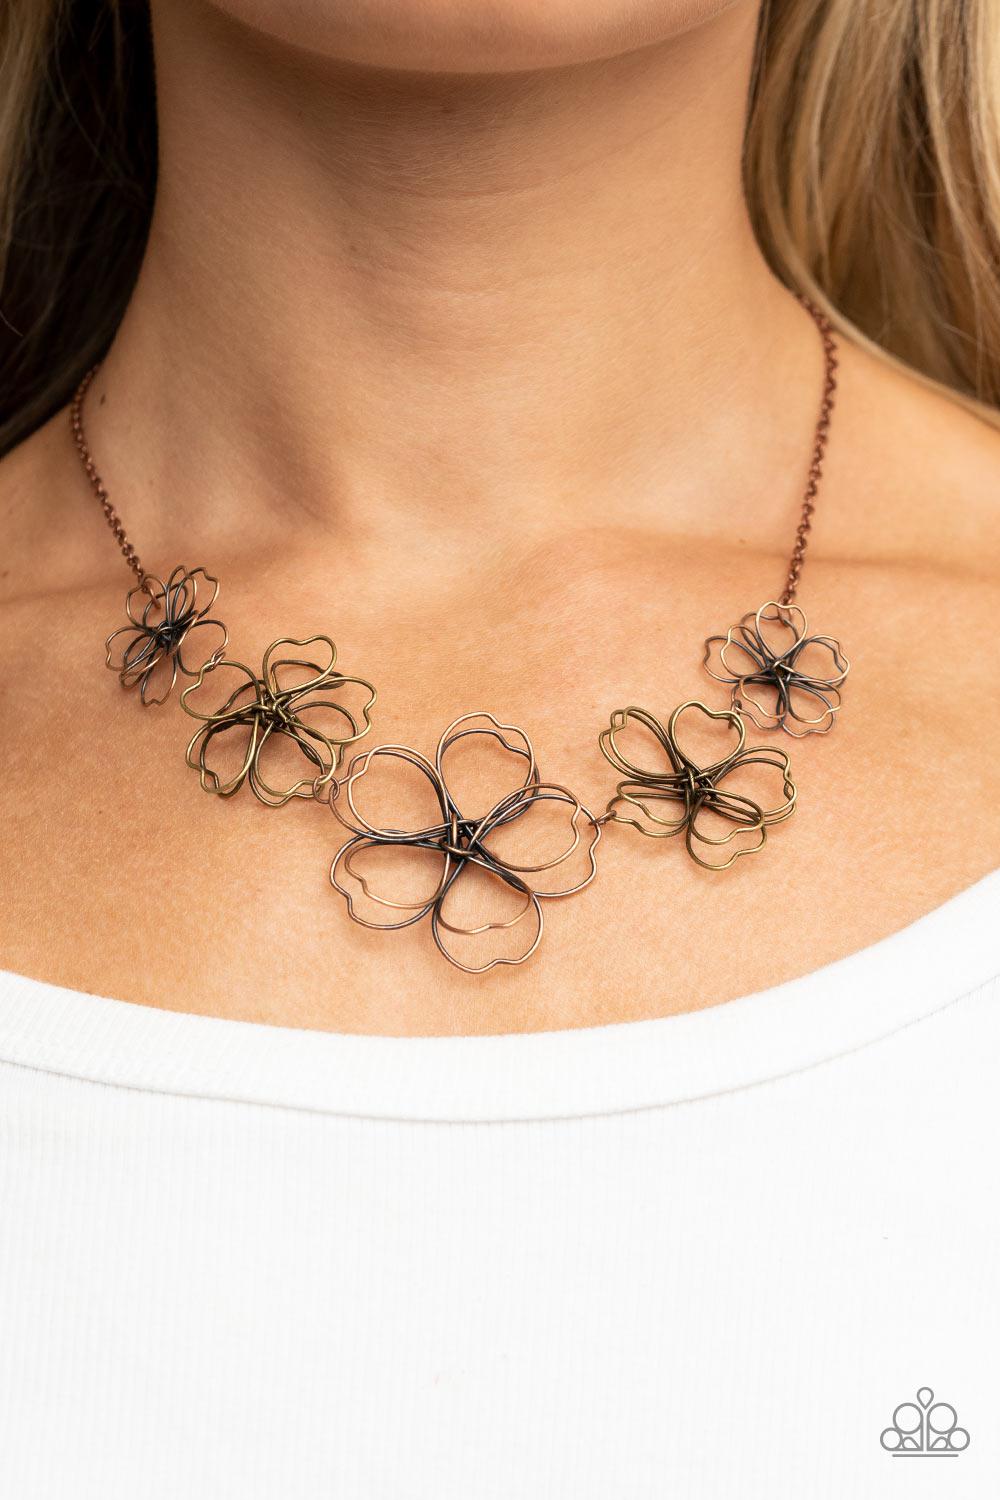 Time to GROW Copper Wire Flower Necklace- lightbox - CarasShop.com - $5 Jewelry by Cara Jewels